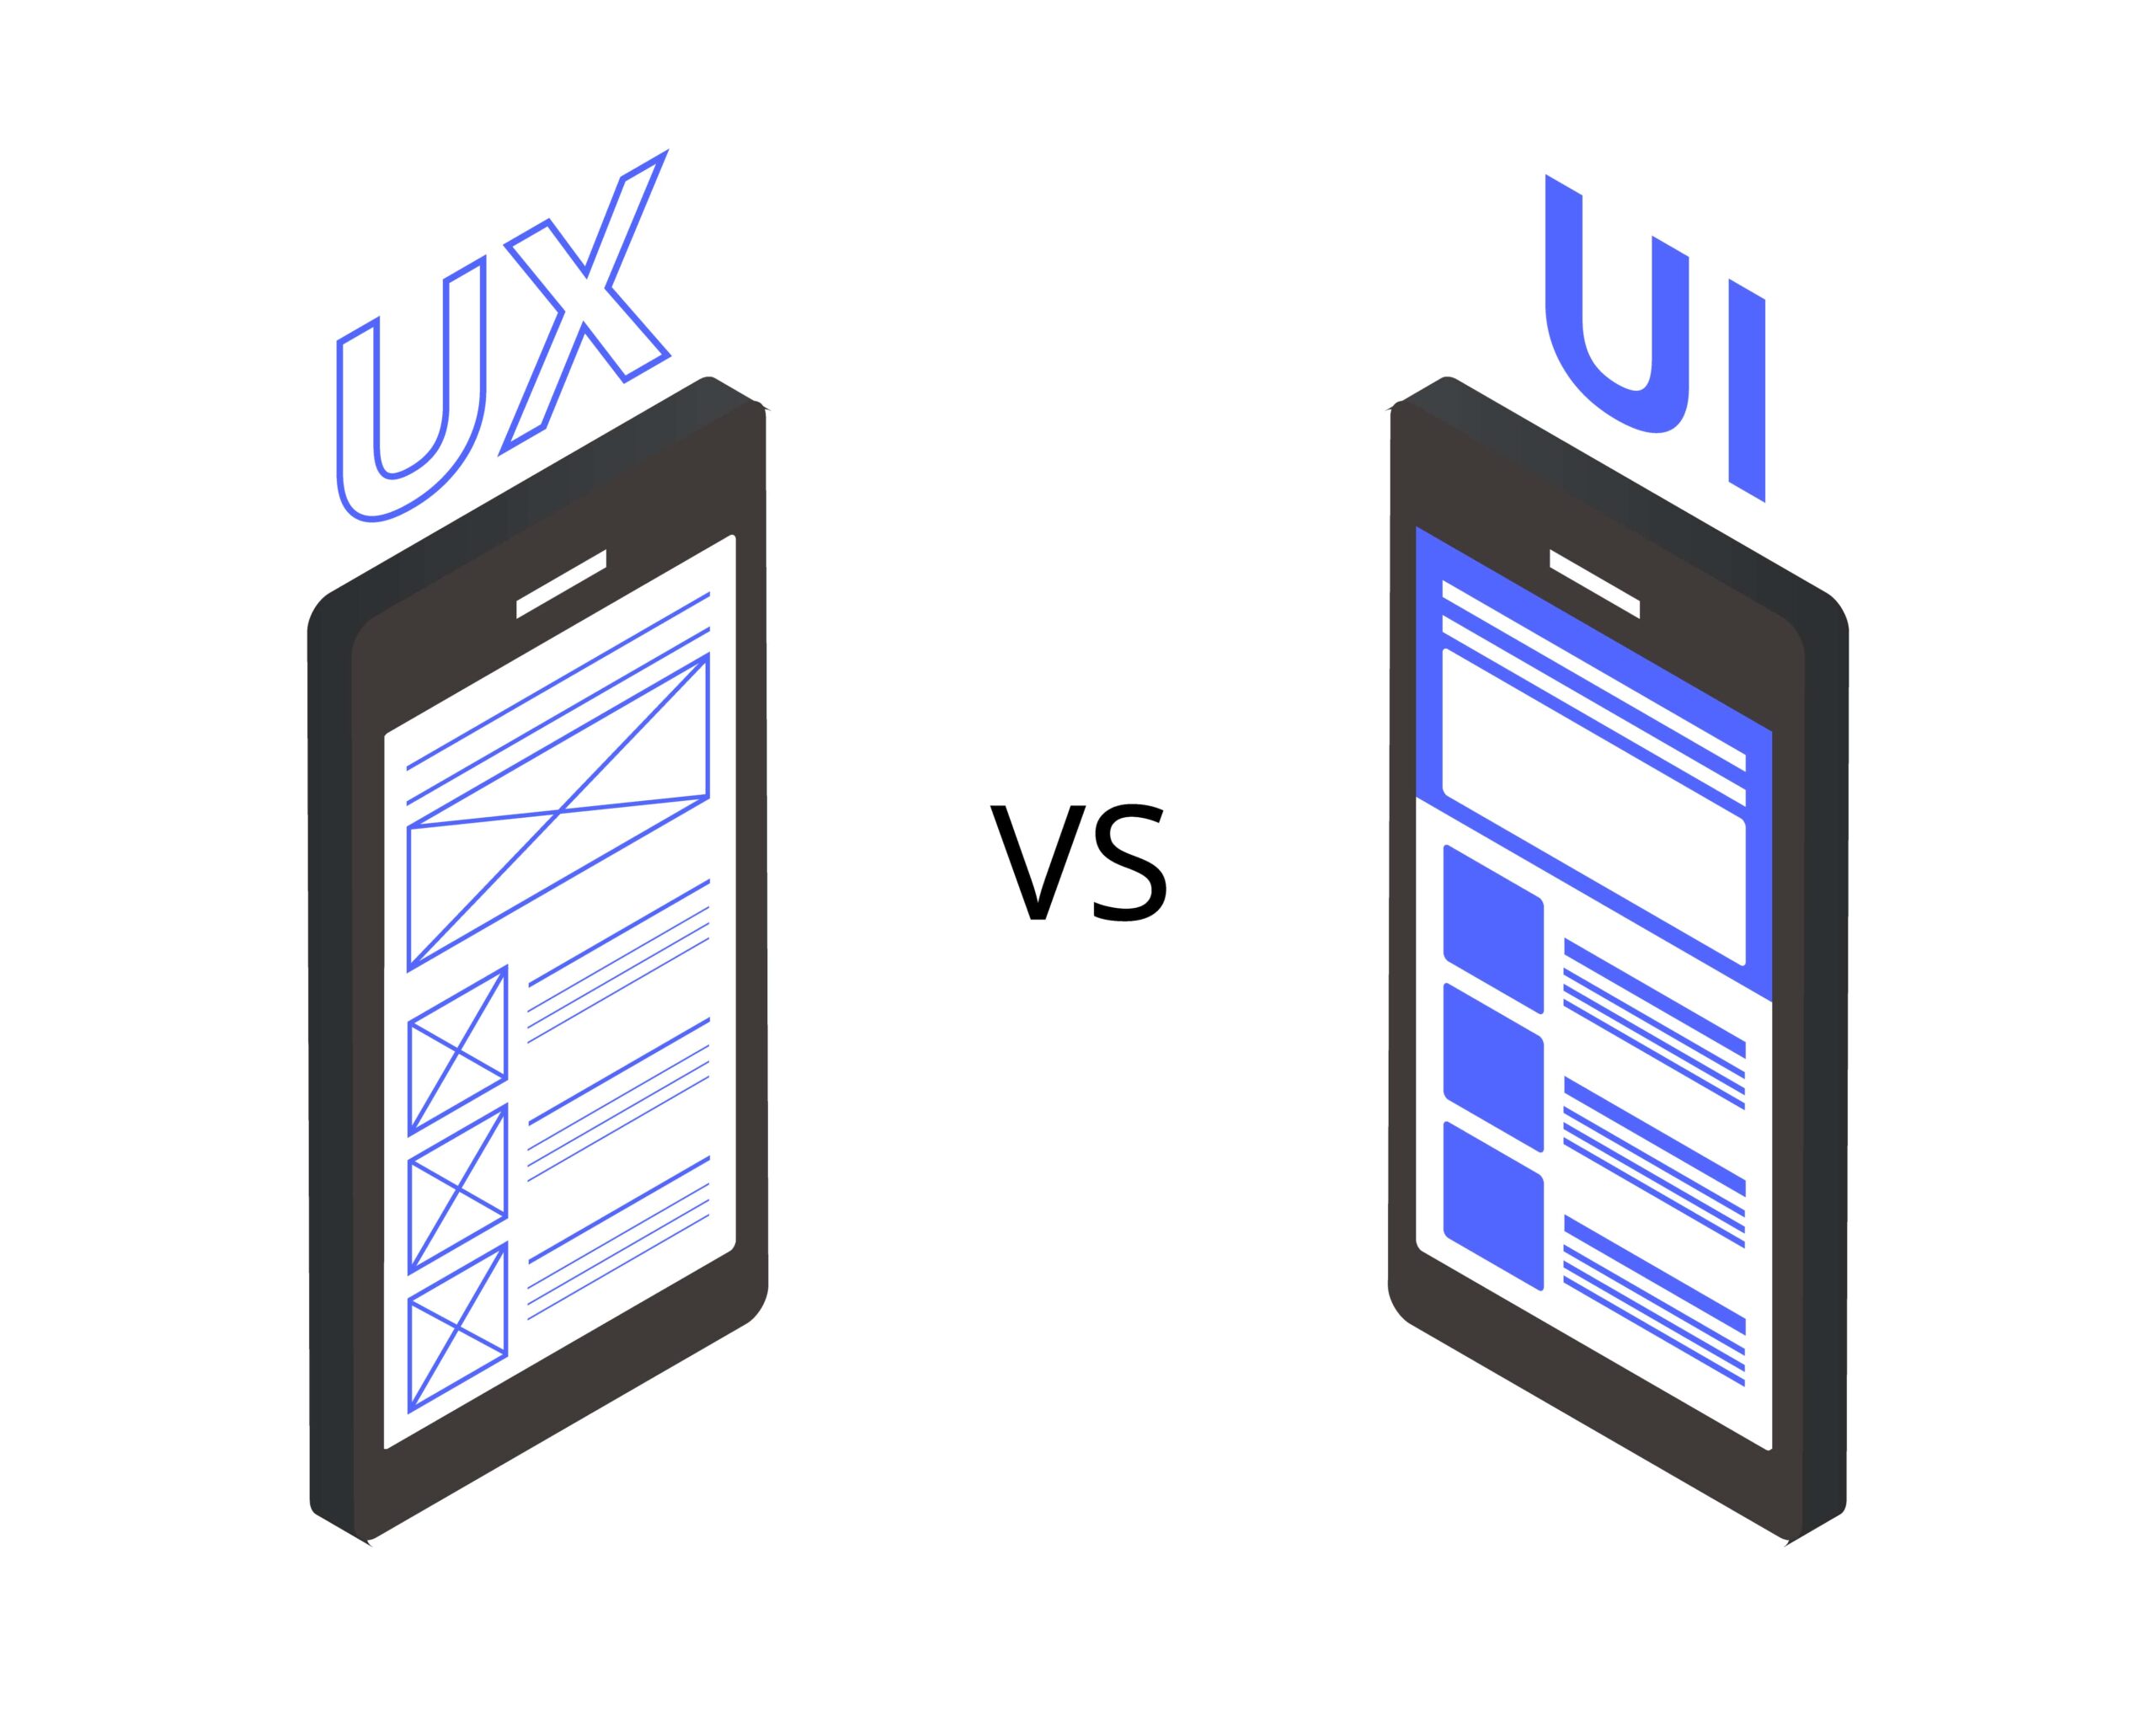 Differences between UX and UI design